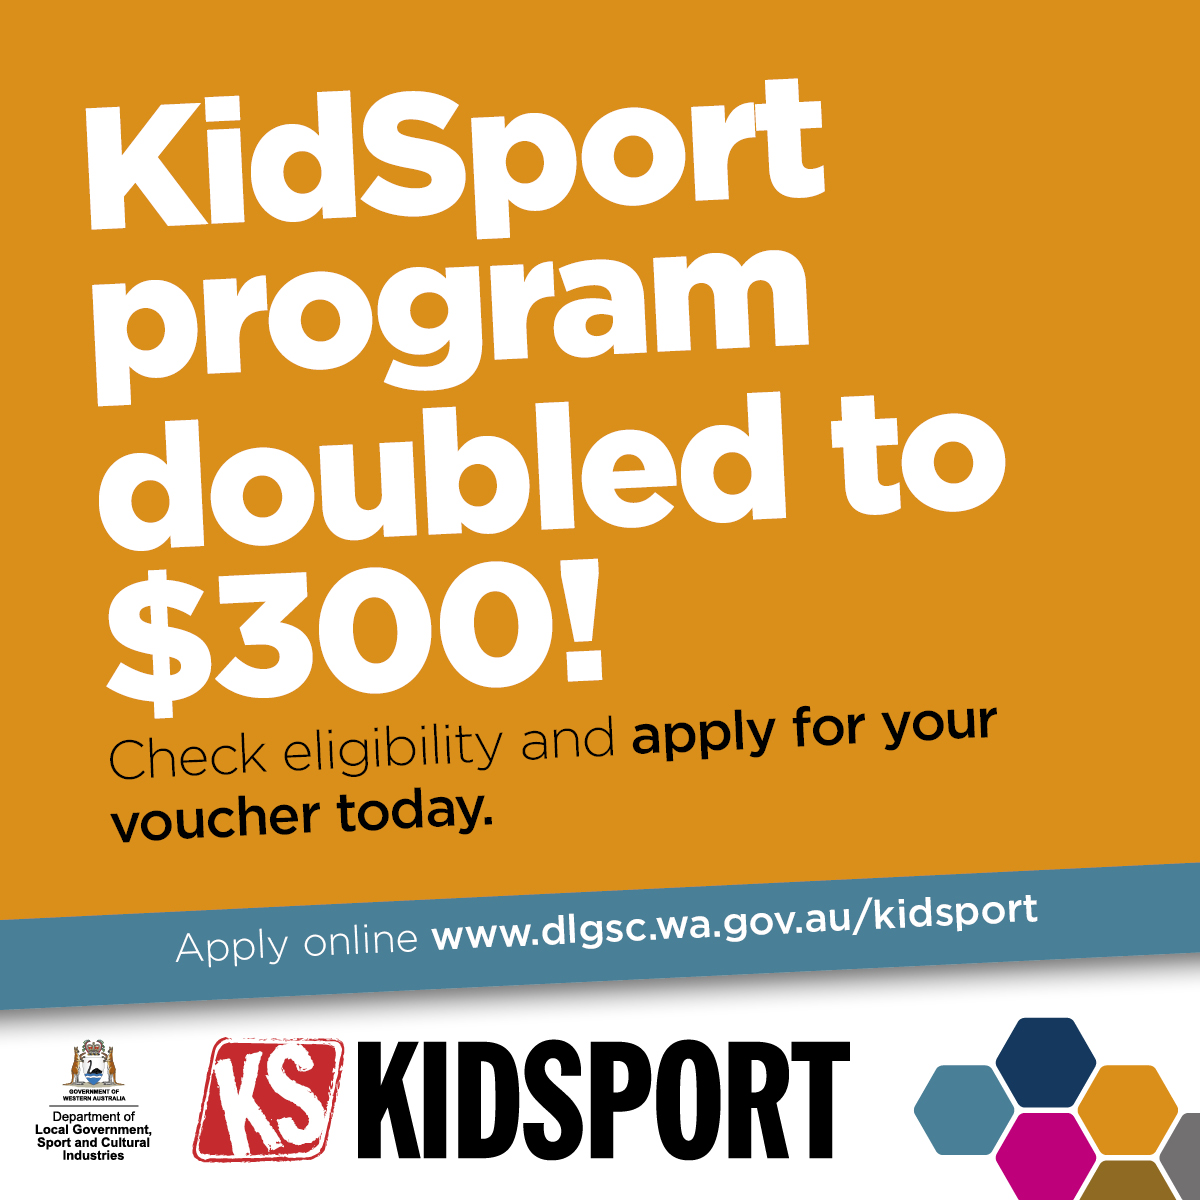 KidSport doubled to $300